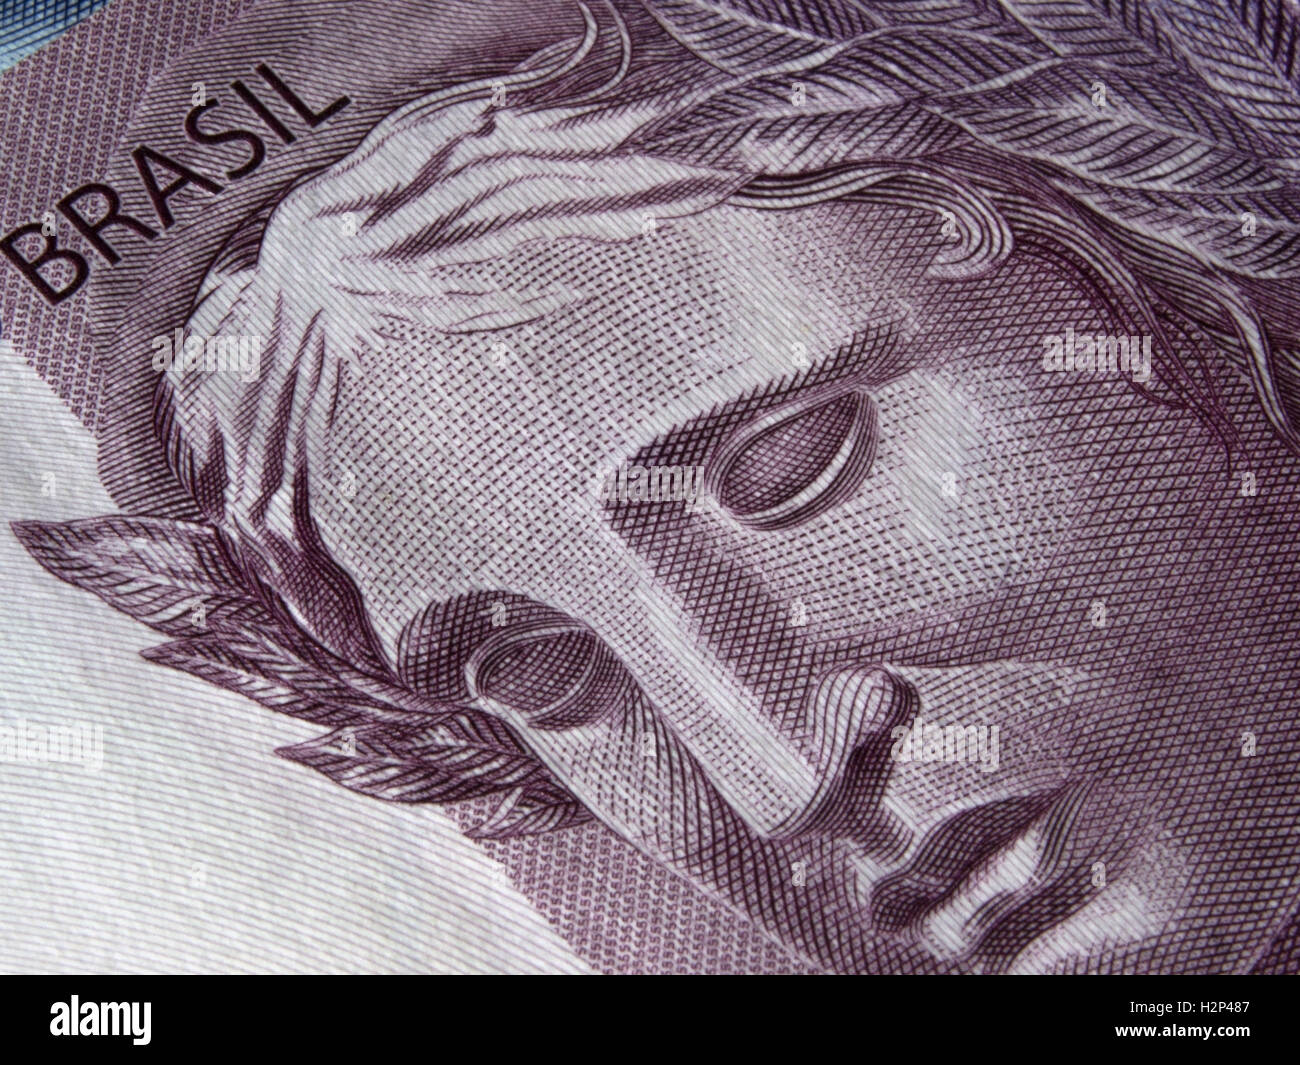 Close-up of brazilian currency notes Stock Photo